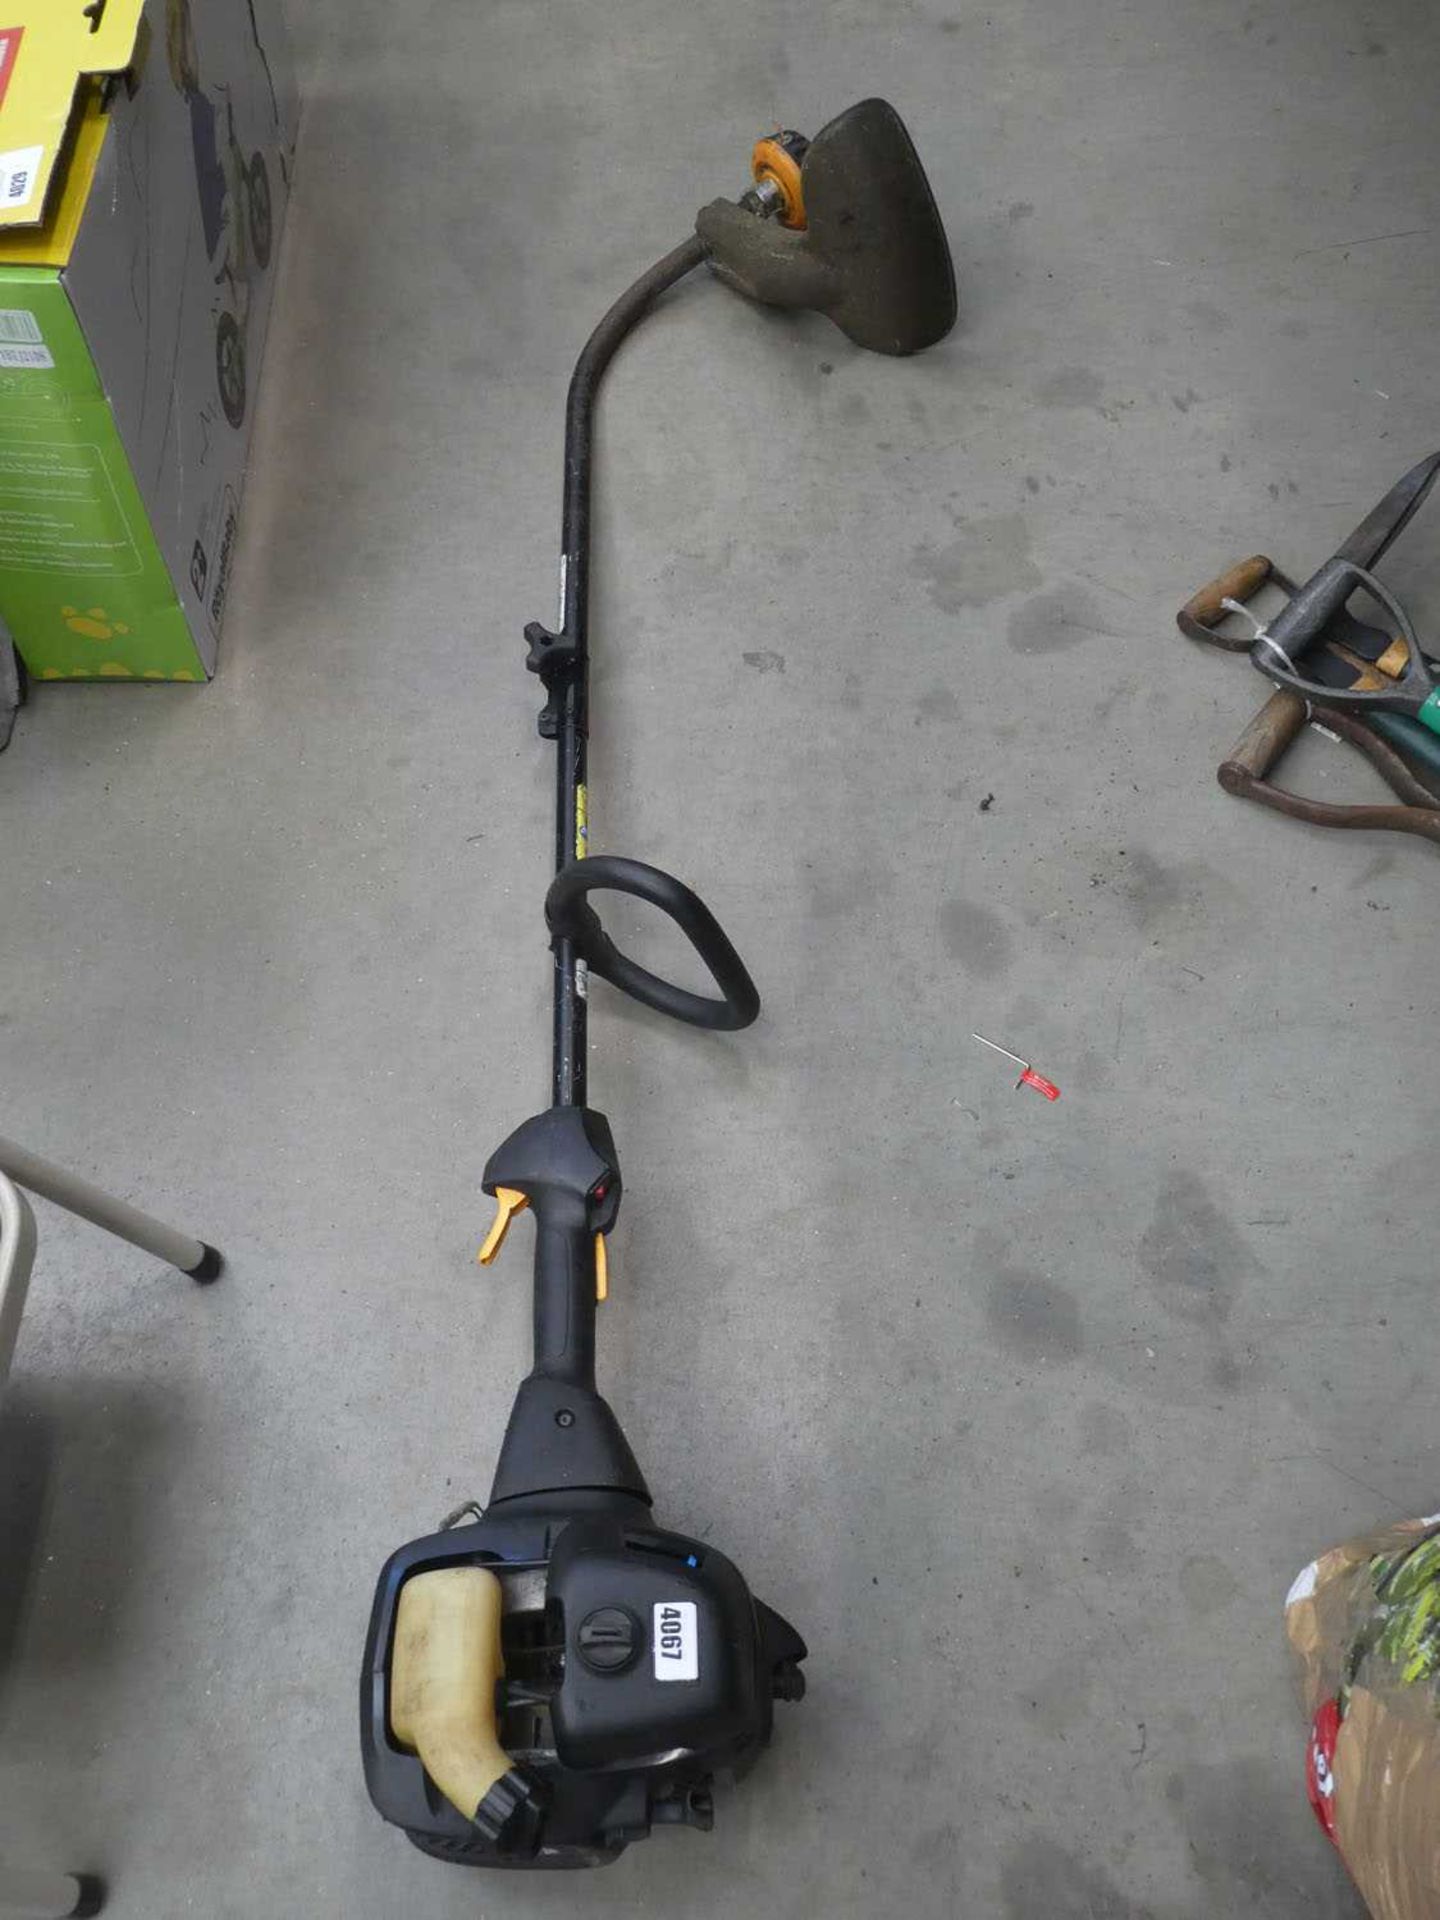 McCullouch petrol powered strimmer